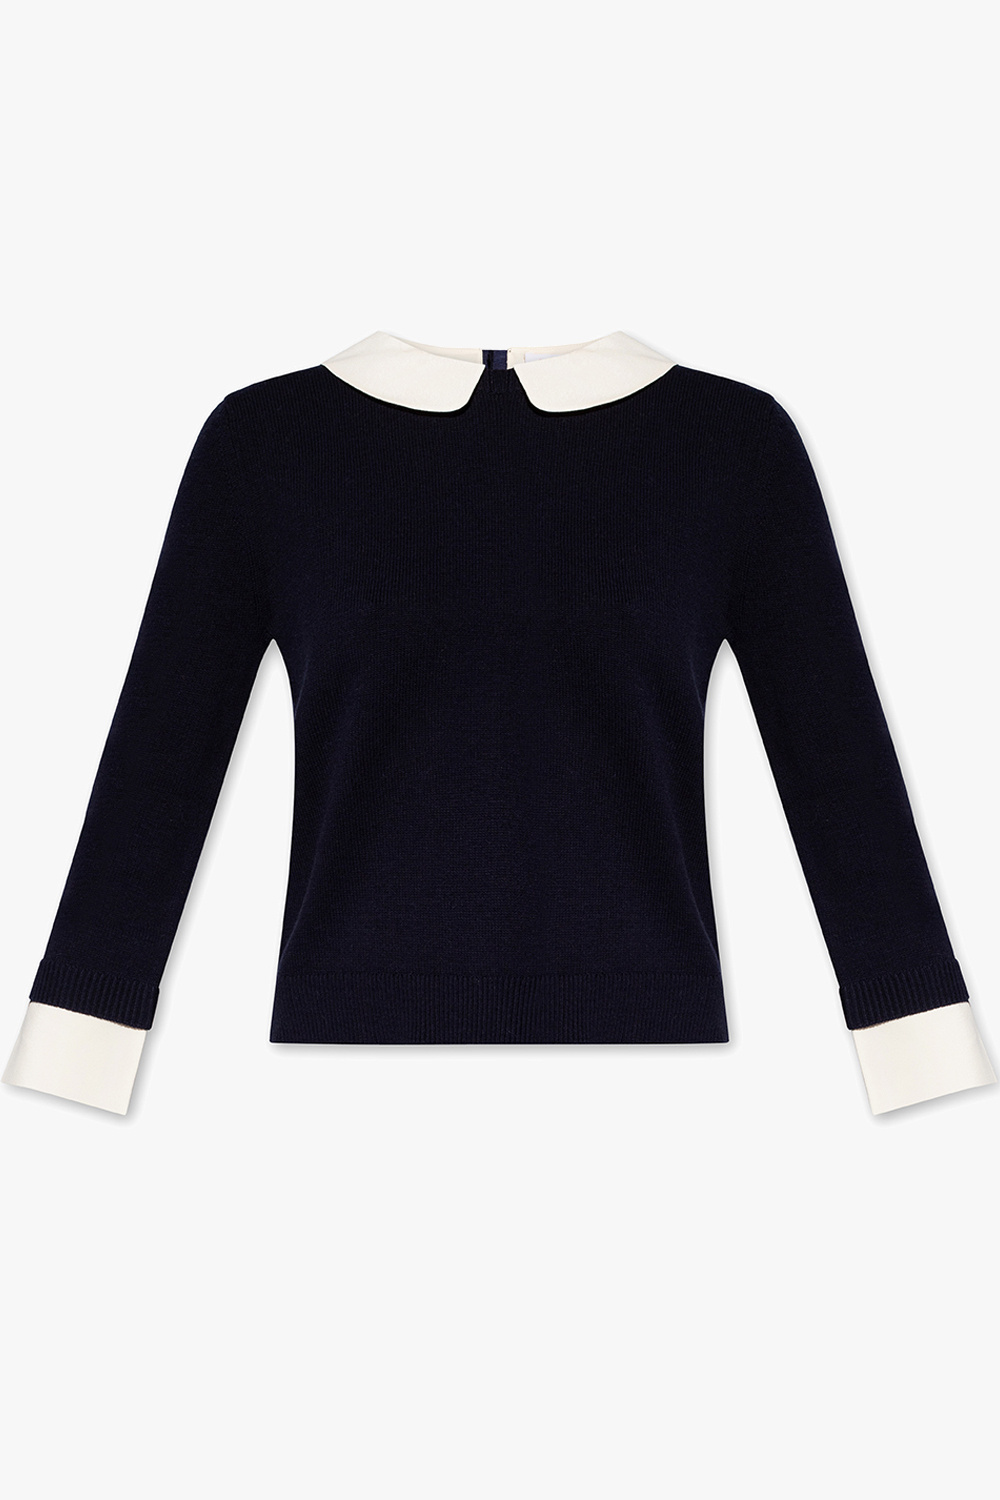 See By Chloé Collared sweater